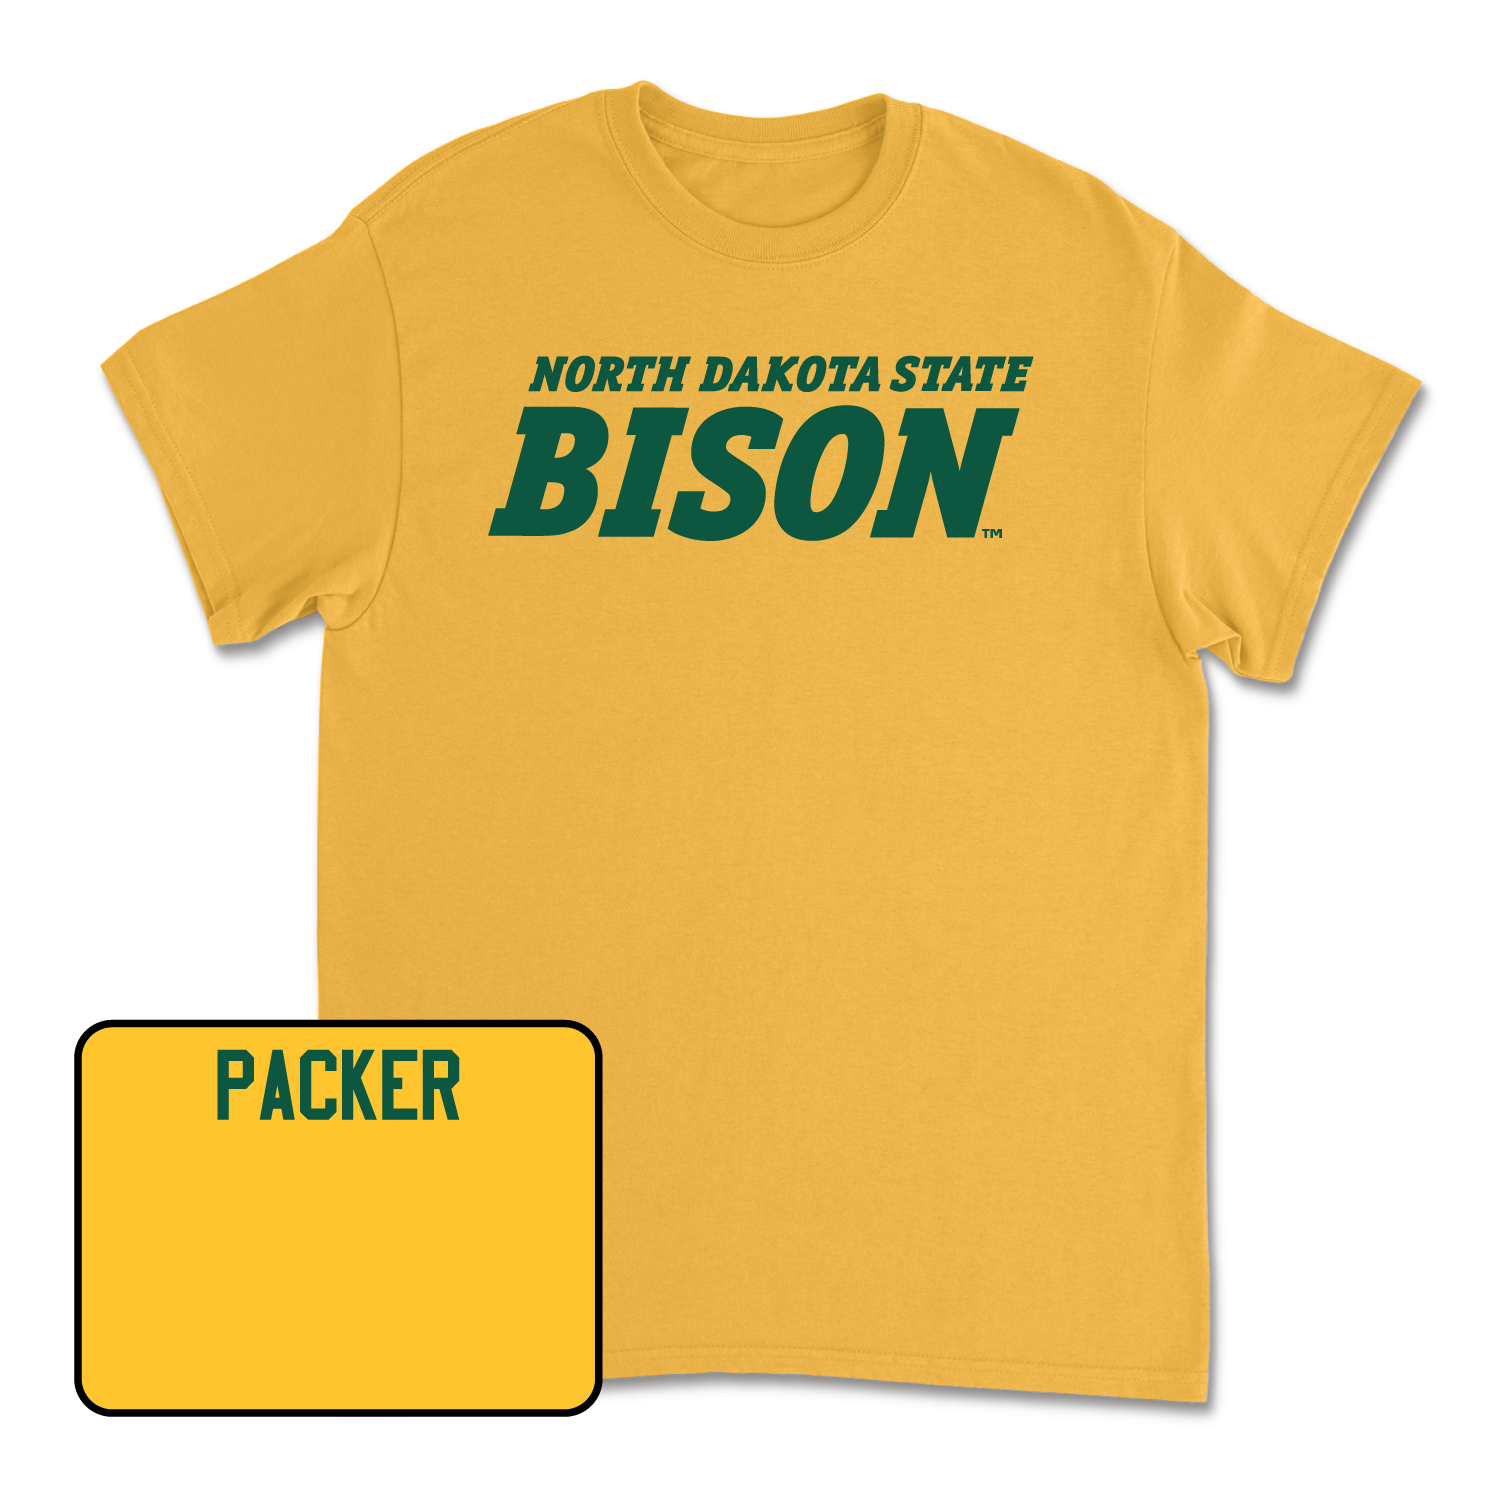 Gold Track & Field Bison Tee Youth Small / Jack Packer